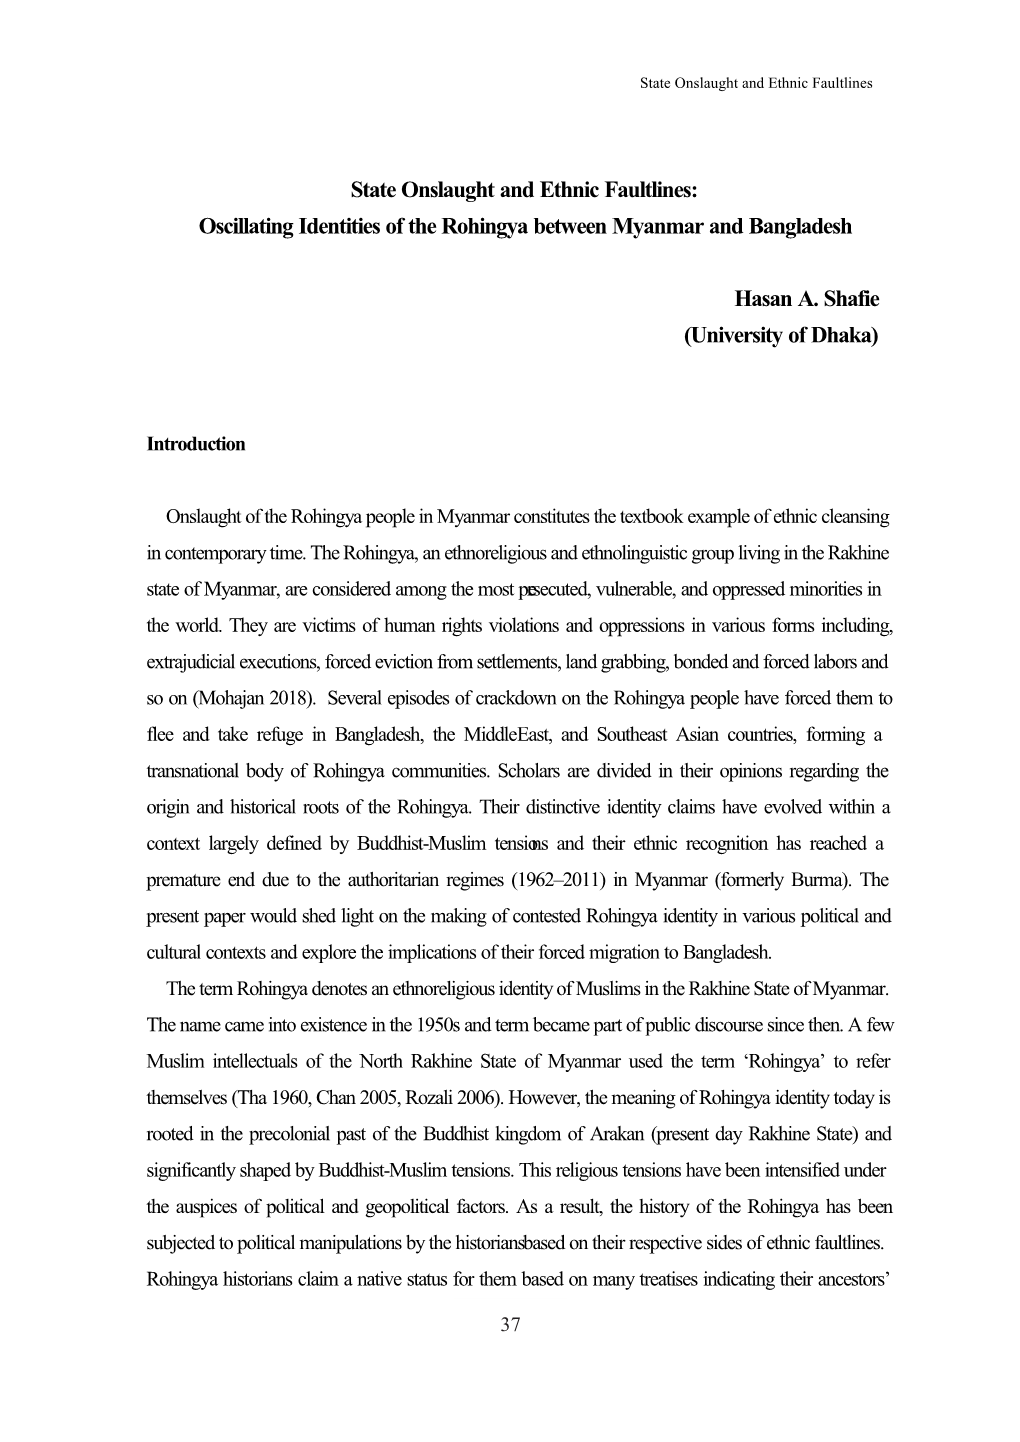 State Onslaught and Ethnic Faultlines: Oscillating Identities of the Rohingya Between Myanmar and Bangladesh